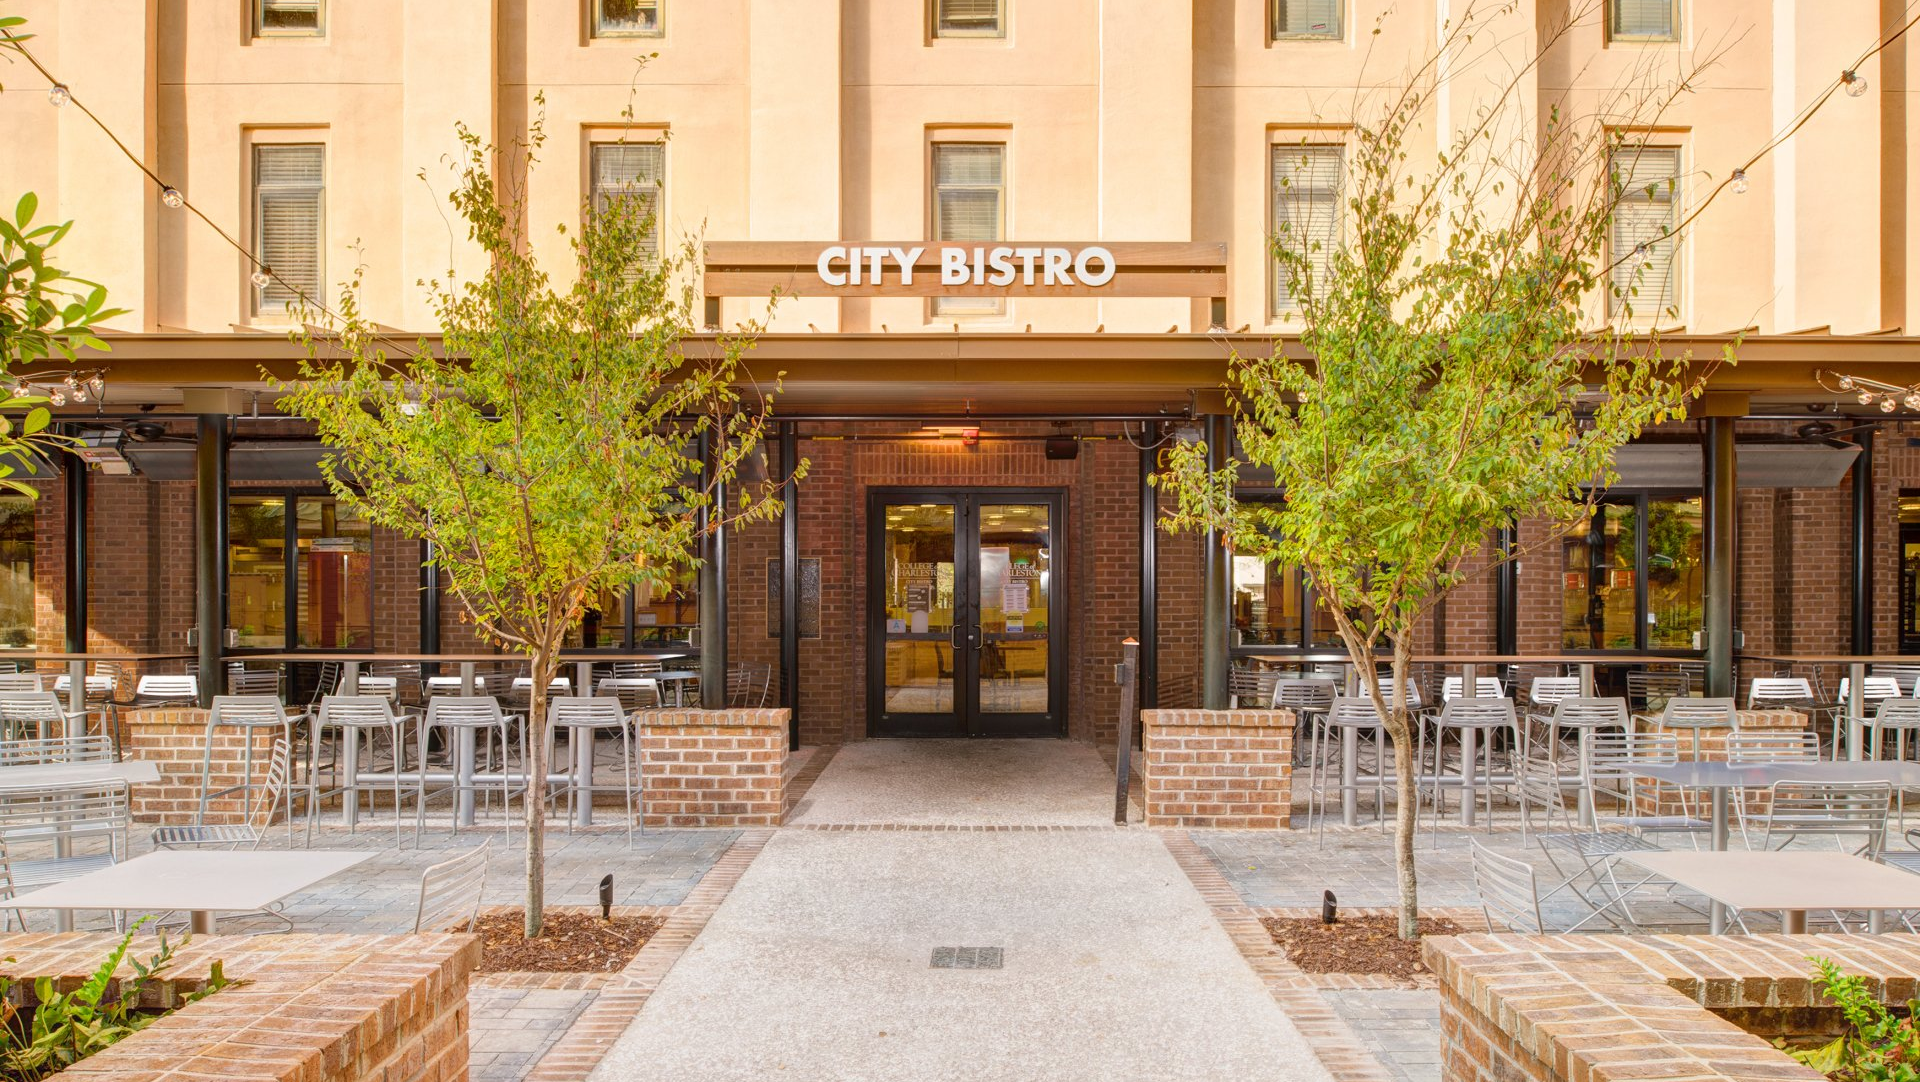 the entrance to the city bistro restaurant is surrounded by trees and tables .